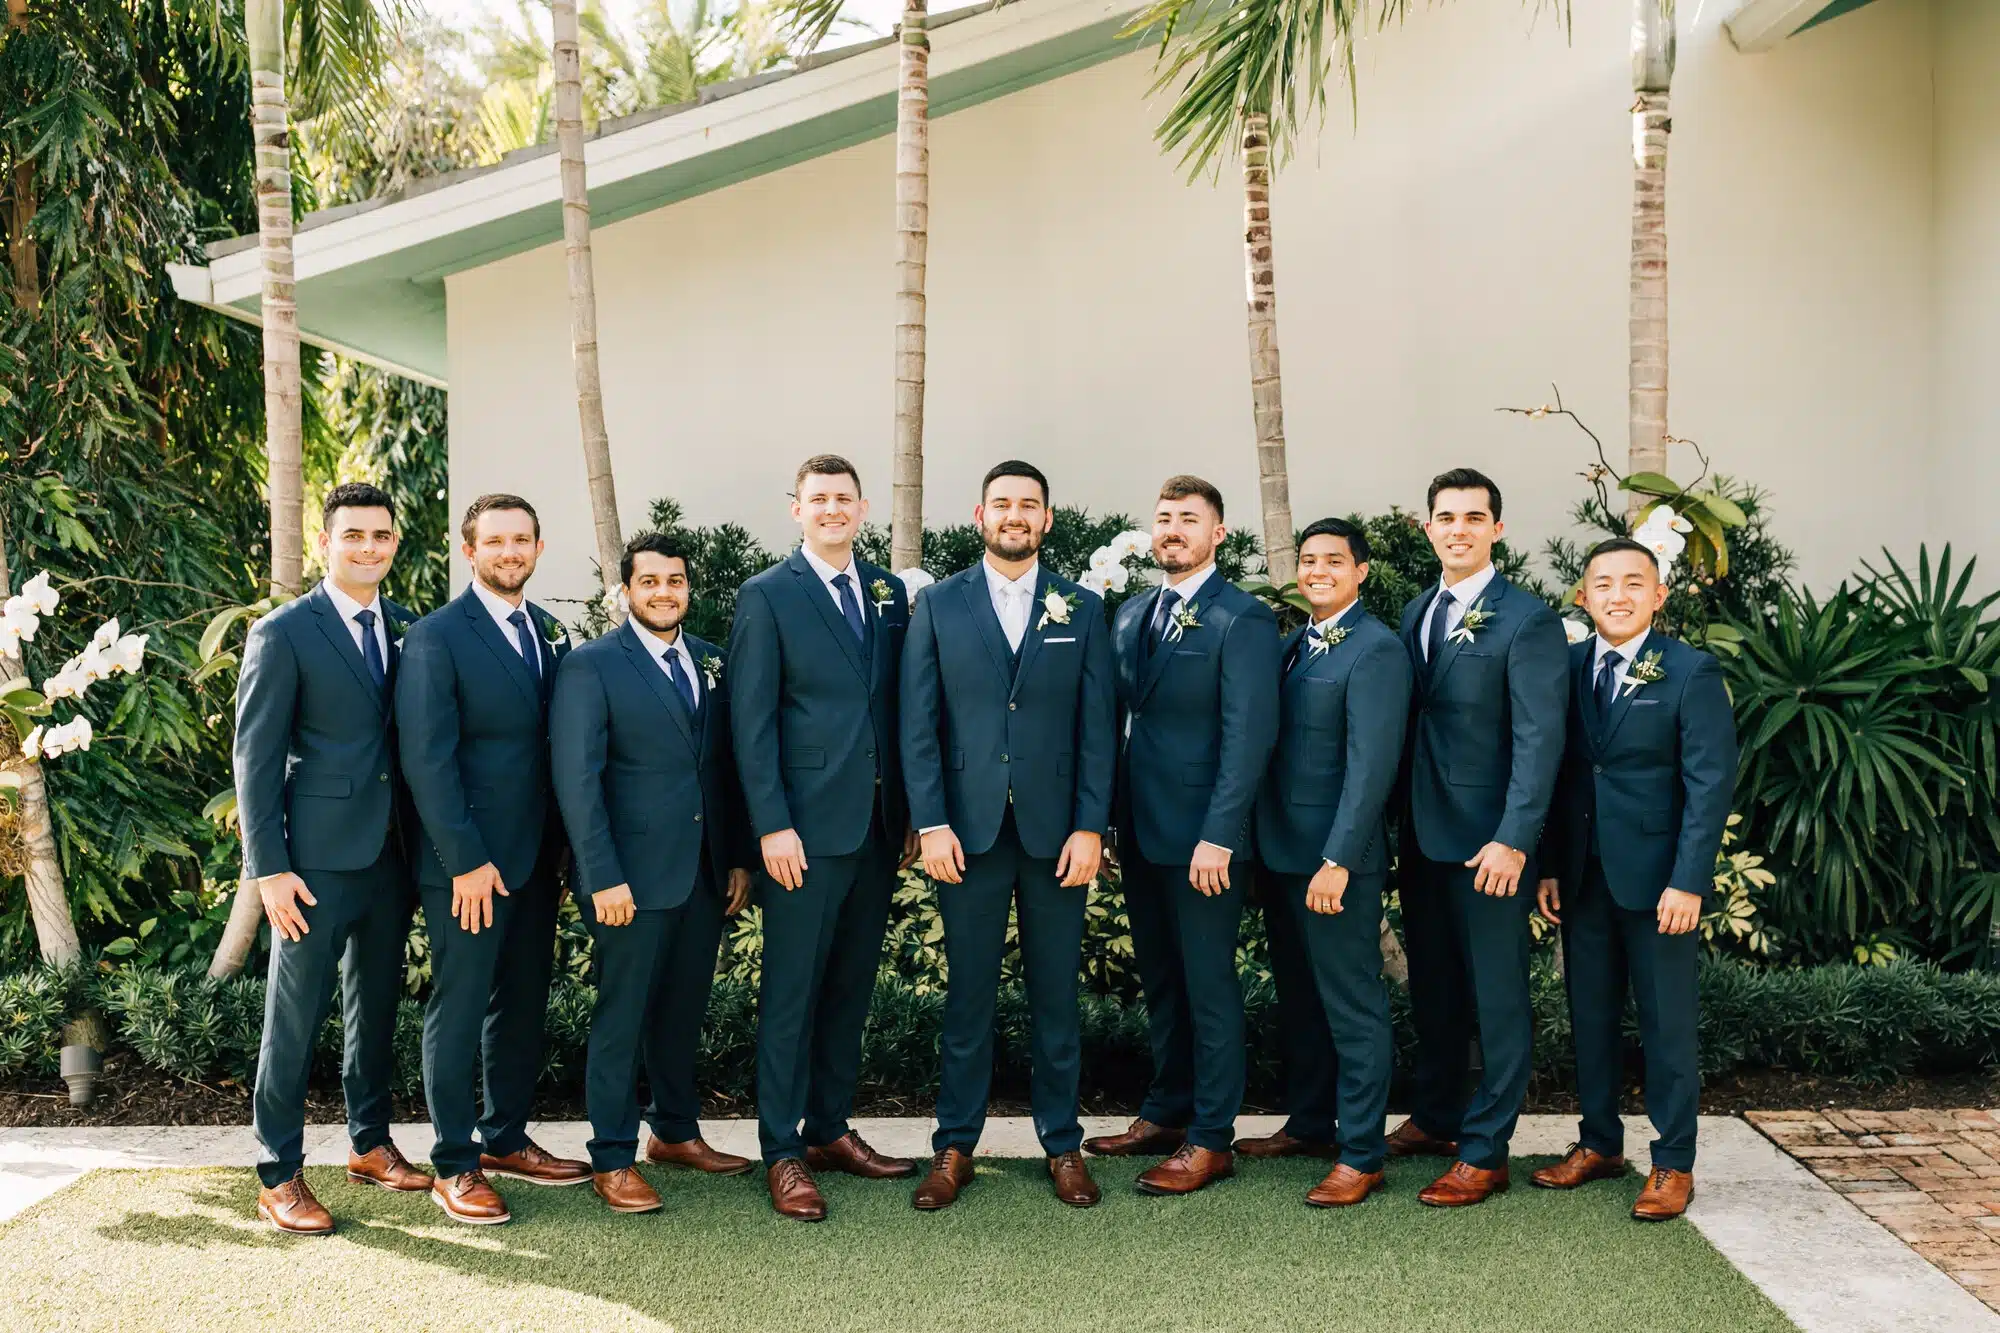 How to differentiate the groom from groomsmen with groomsmen blurred out in the background